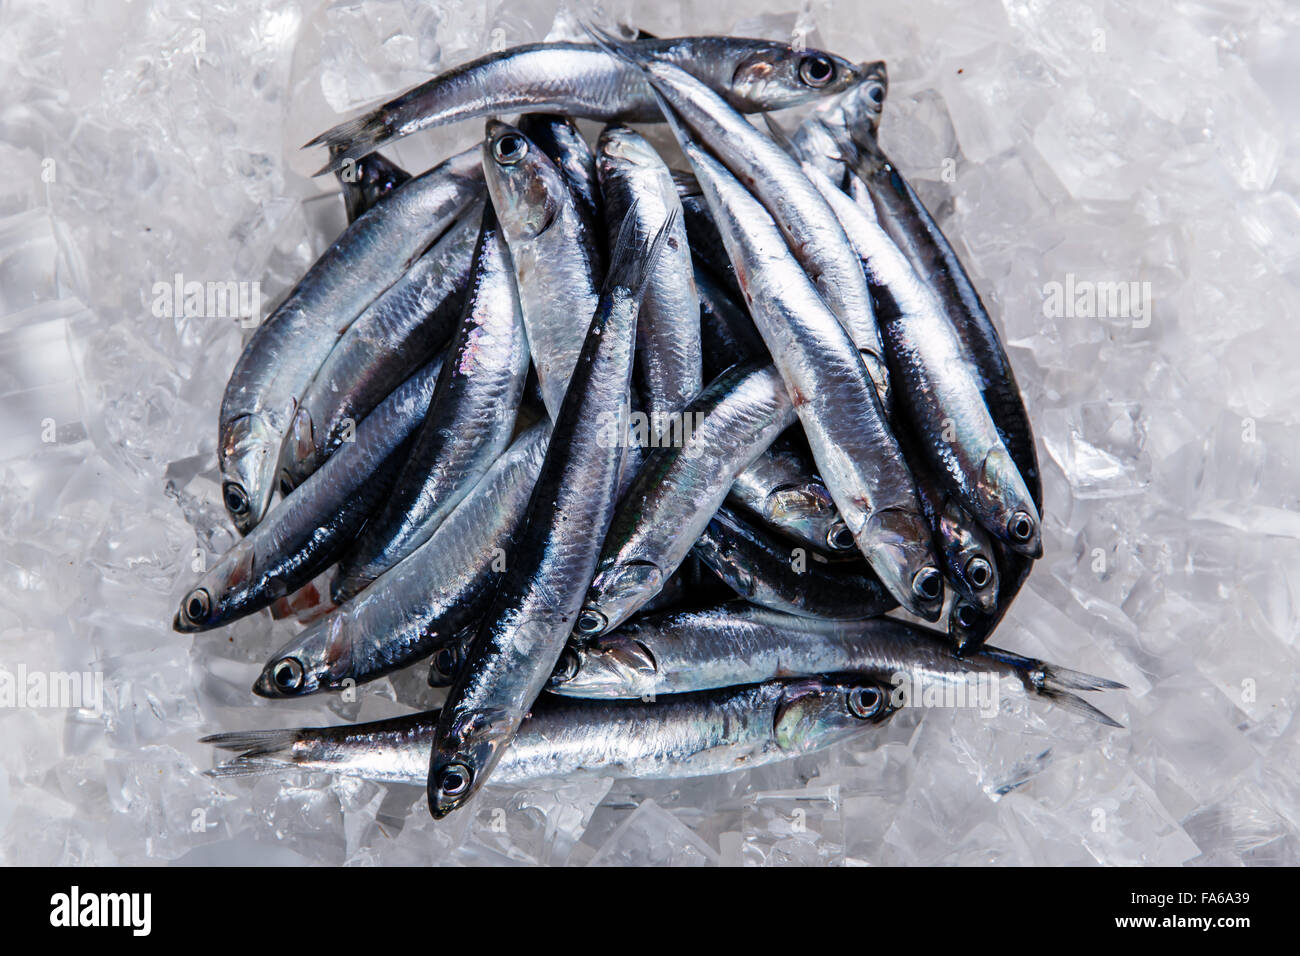 fresh raw fish anchovy on ice seafood Stock Photo